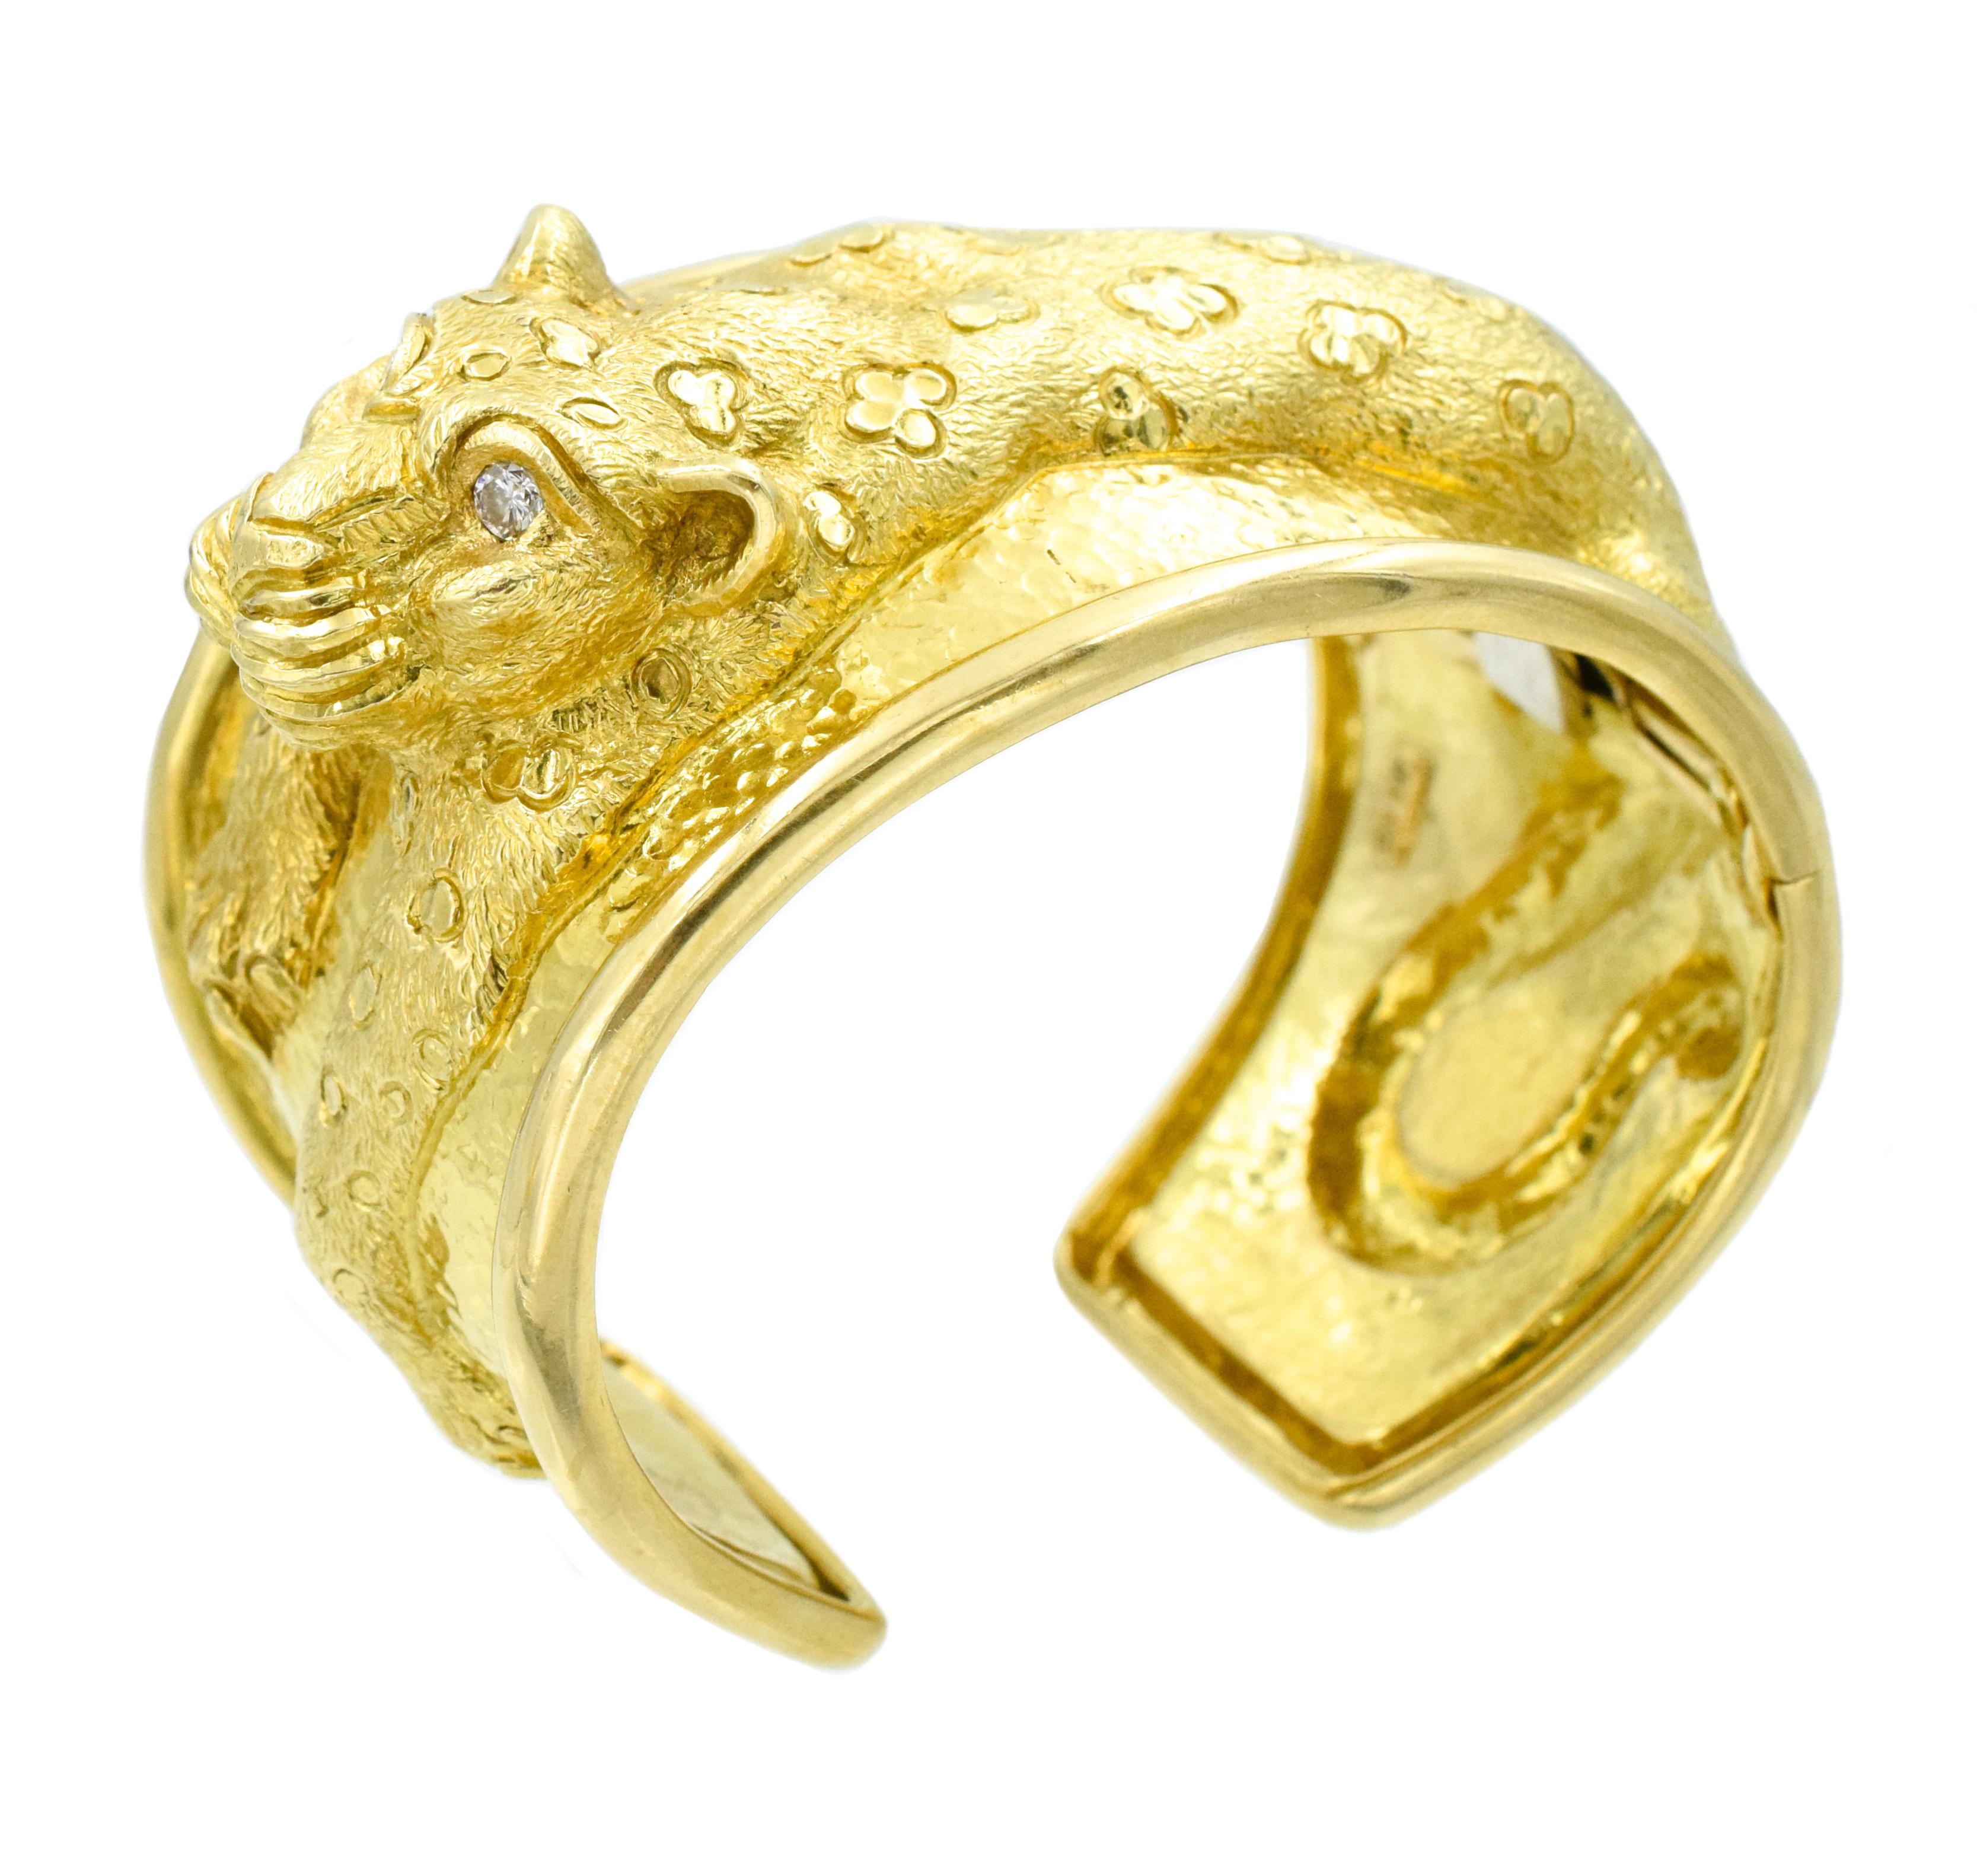 David Webb 18k Gold and Diamond Leopard Bangle Cuff This bracelet has leopard motif created in gold repoussé drapes over the hinged cuff, its eyes set with round brilliant-cut diamonds; 
signed Webb, no. JA60
113 grams;
 Circumference: 6 inches